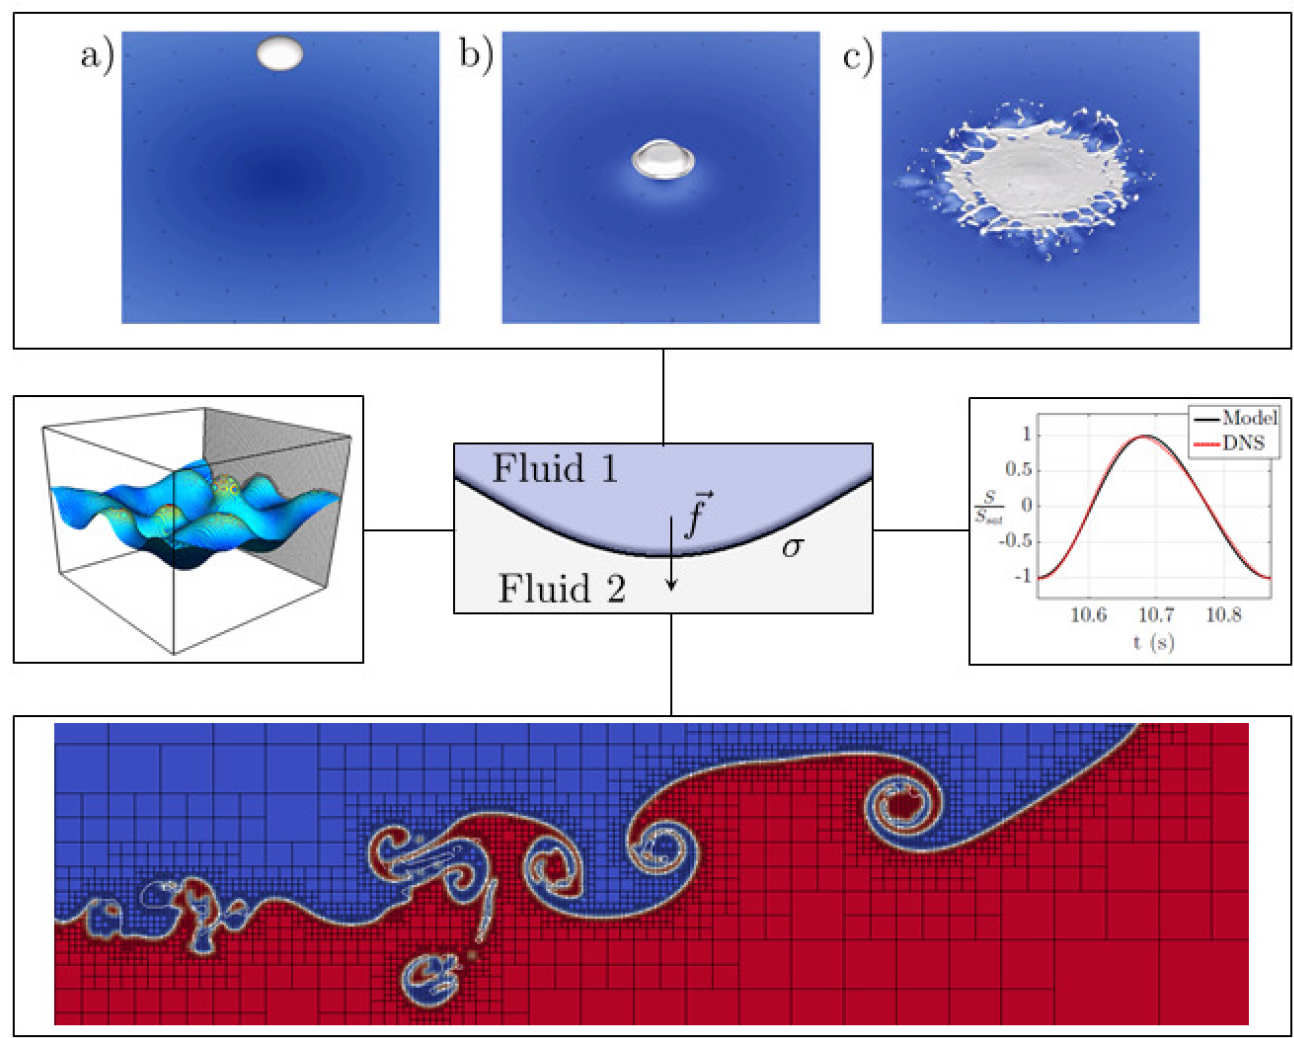 The image illustrates the wide range of active investigations, from studies on violent drop impact (top and bottom) to microfluidic mixing in tiny geometries (left). Comparisons of novel analytical models to state-of-the-art computational methods are often employed (right, interfacial waves) and used towards the study of both fundamental and industrial phenomena.